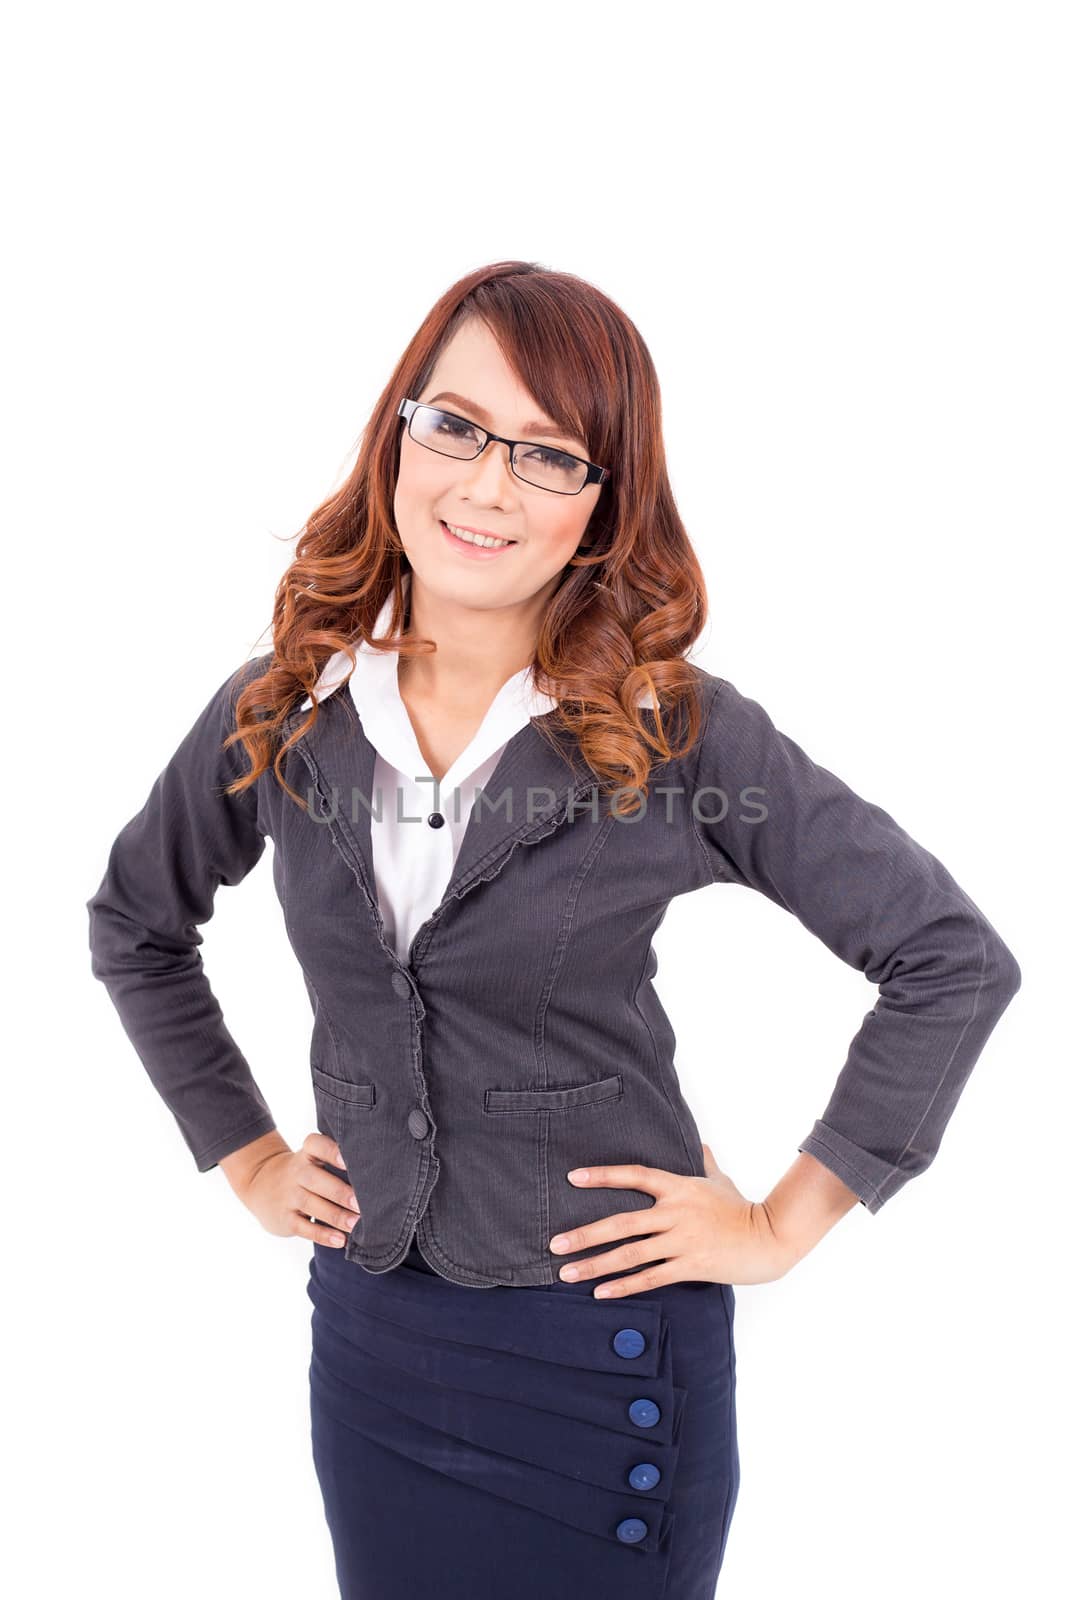 Smiling young business woman wearing glasses